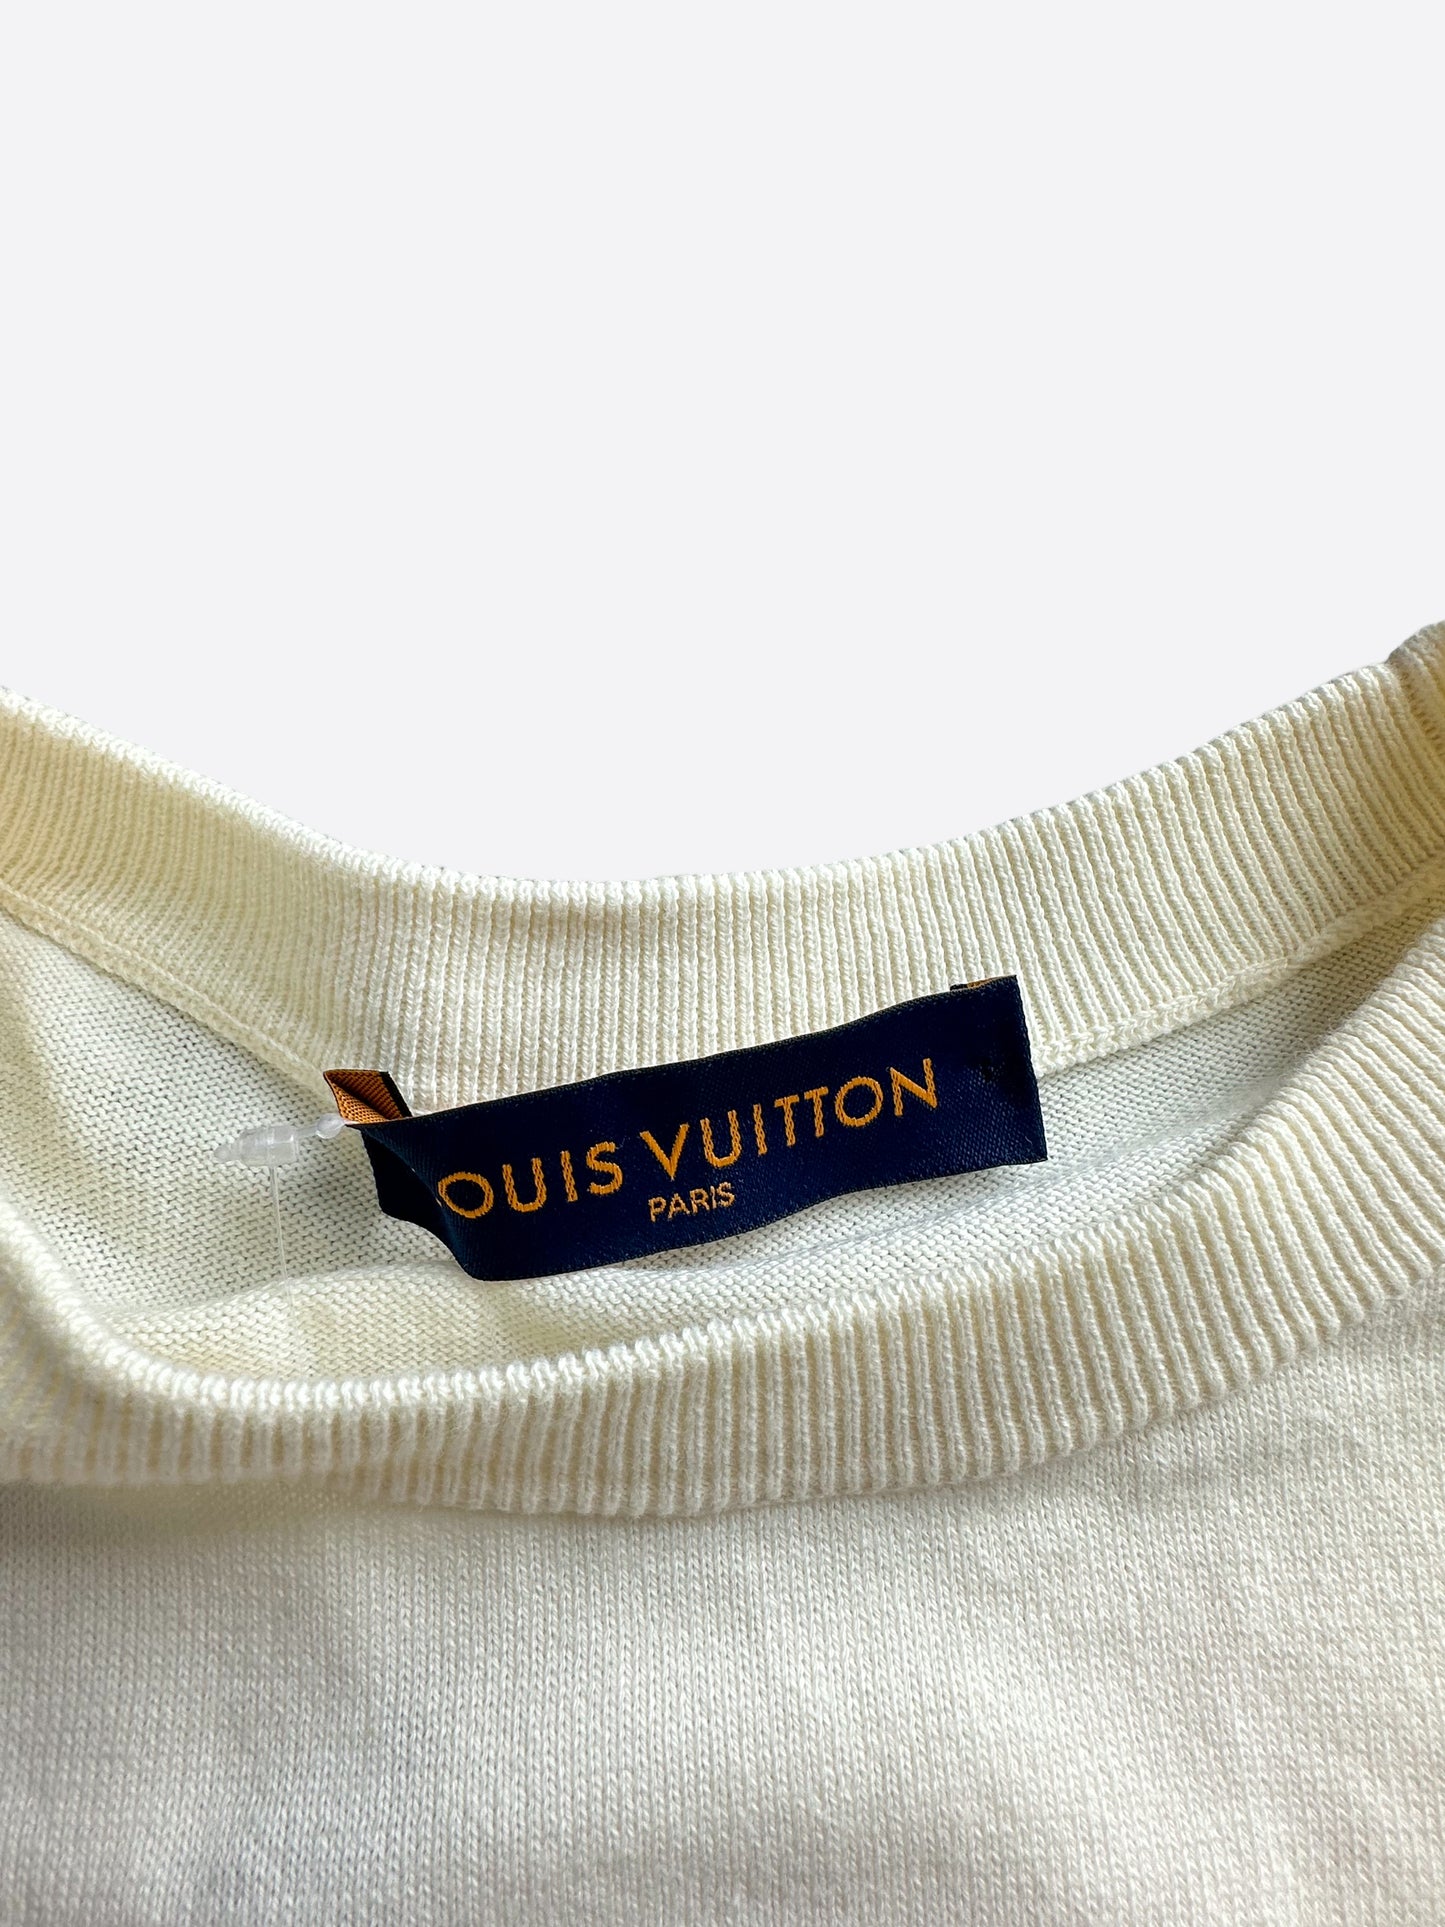 LV Made Duck Louis Vuitton Shirt, hoodie, sweater, long sleeve and tank top